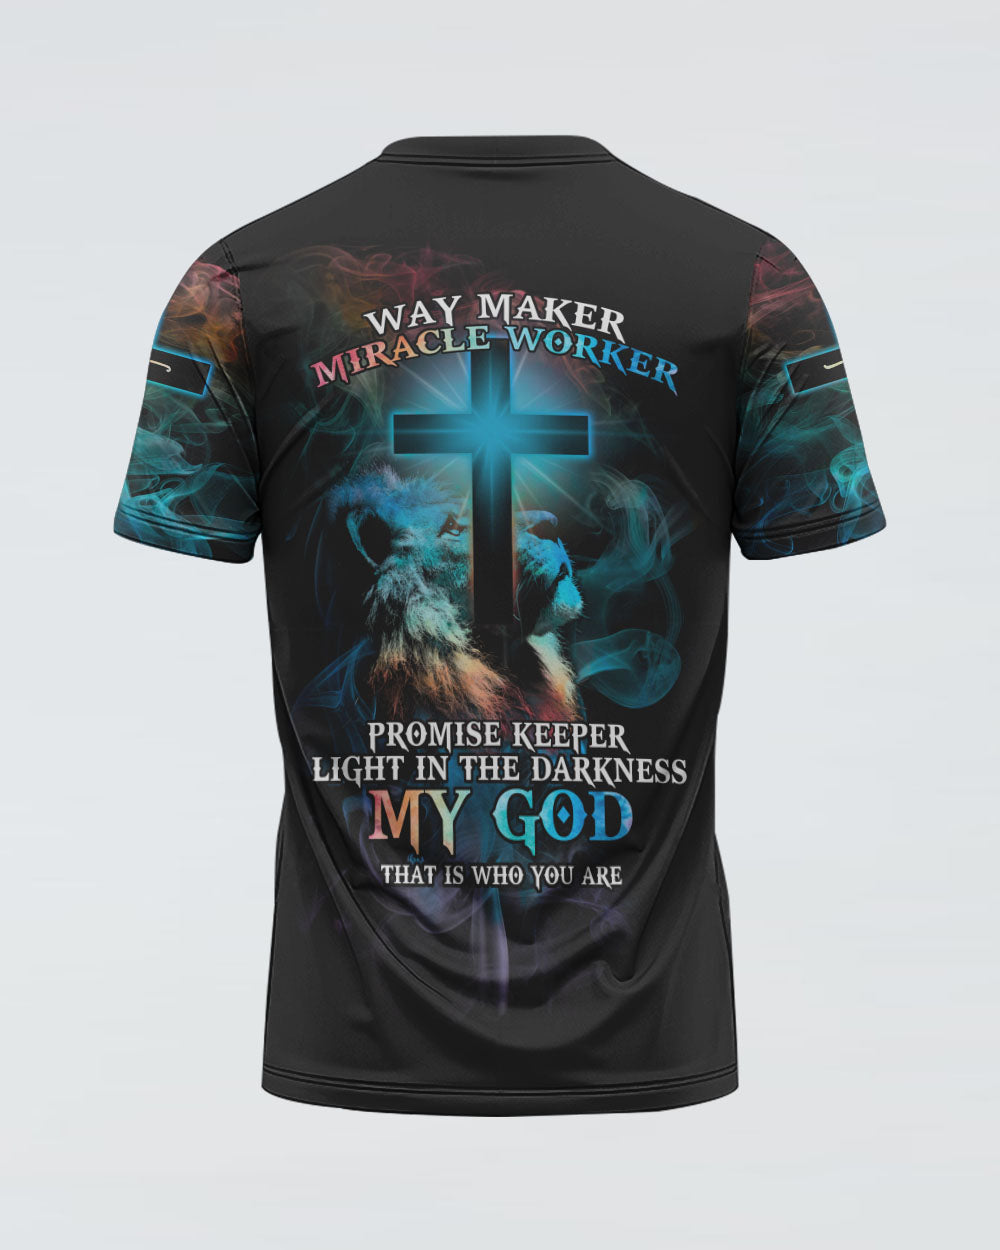 Way Maker Miracle Worker Lion Cross Light Colorful Women's Christian Tshirt